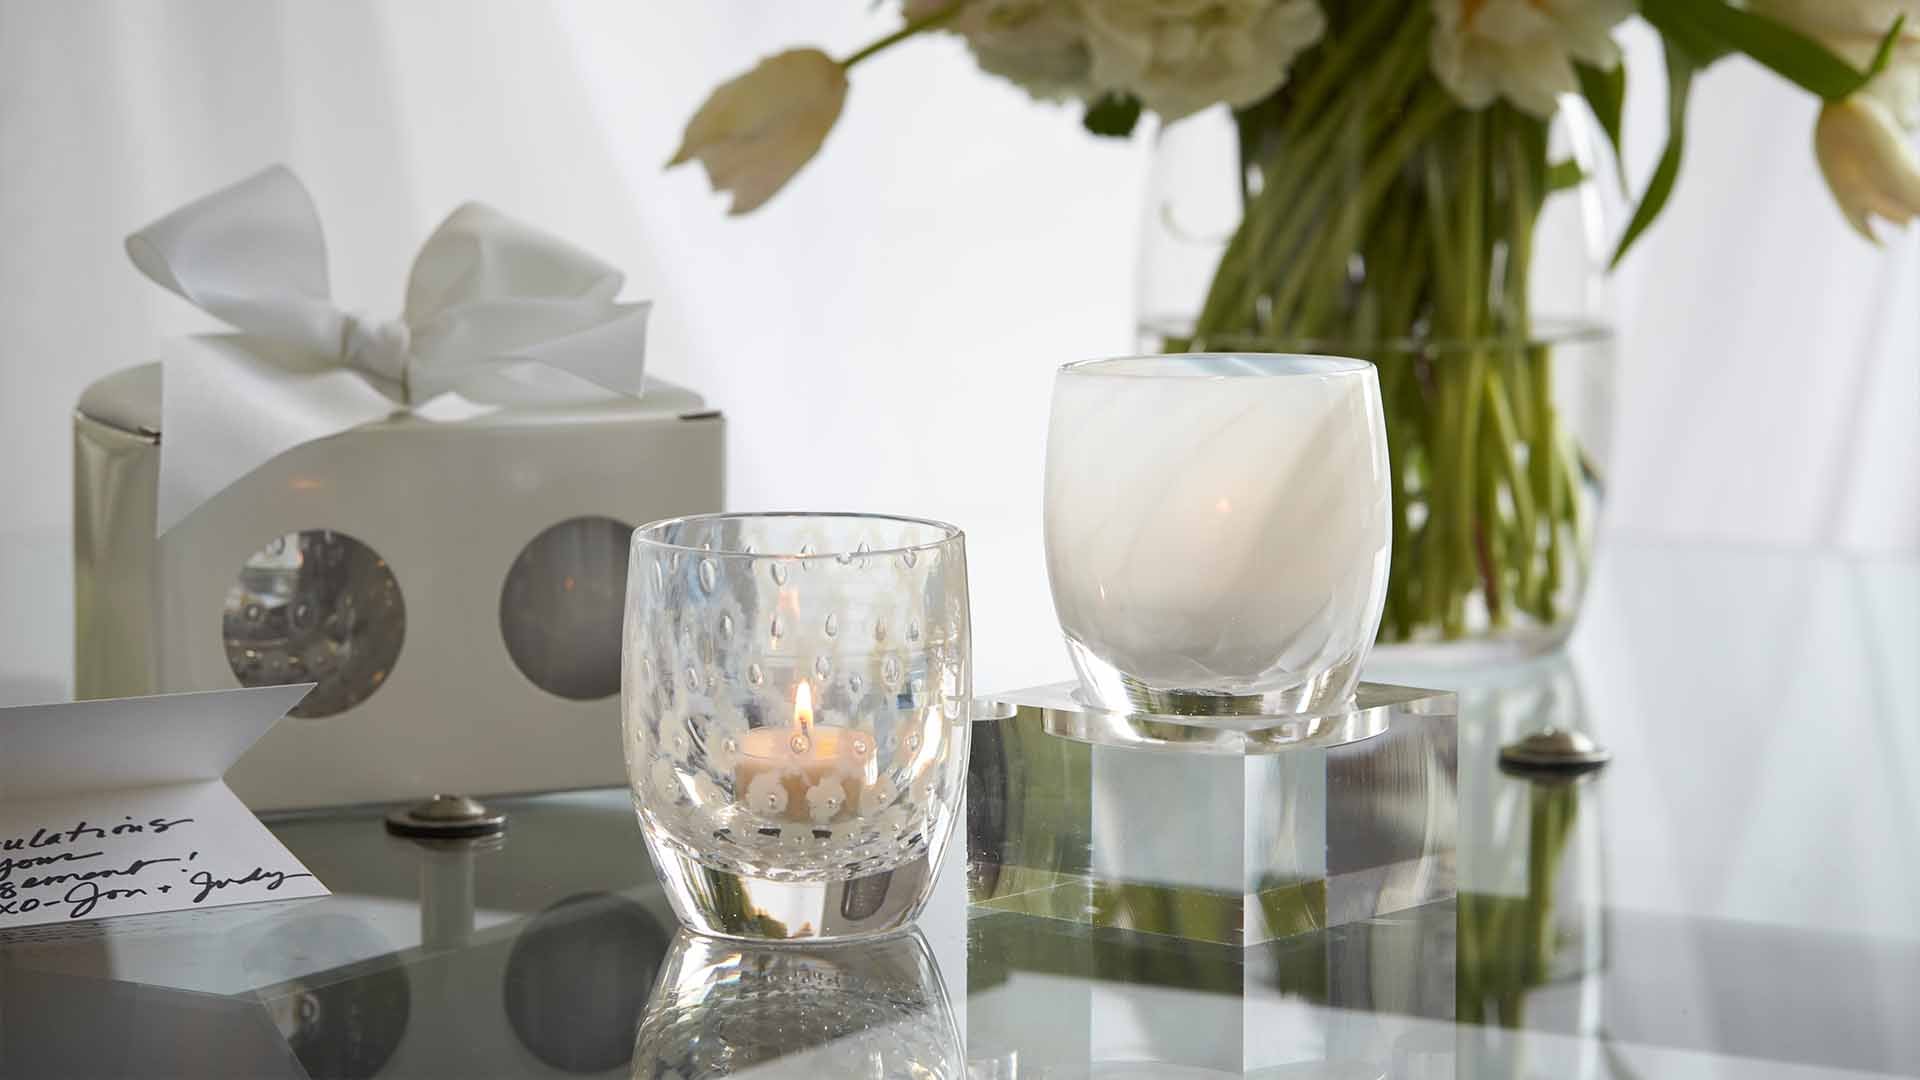 become one set on a glass table with flowers, next to a bowed box and hand written card.